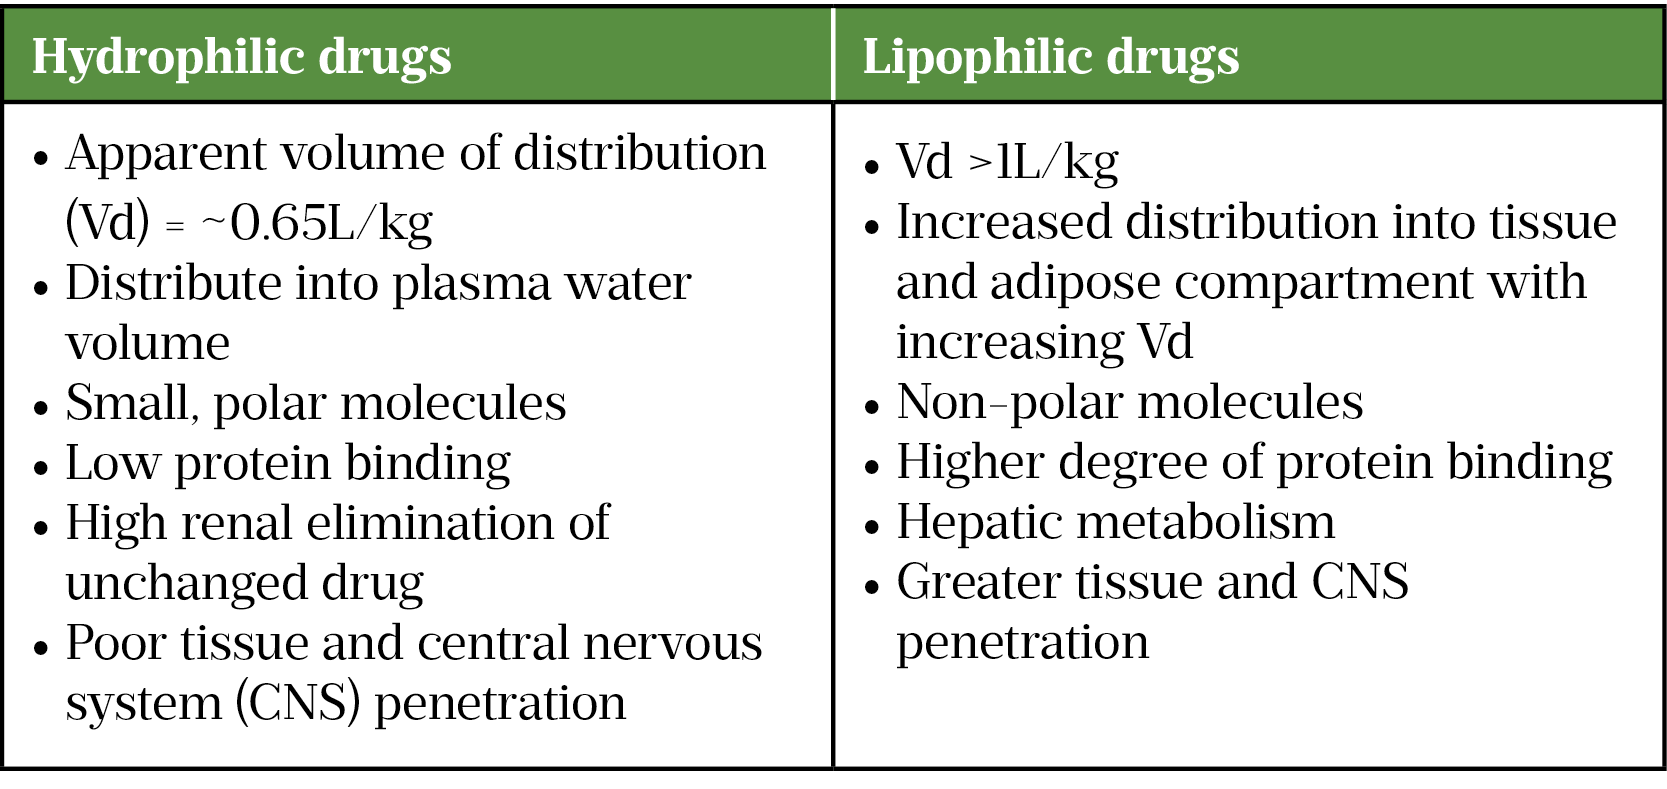 Table 3: Properties of hydrophilic and lipophilic drugs